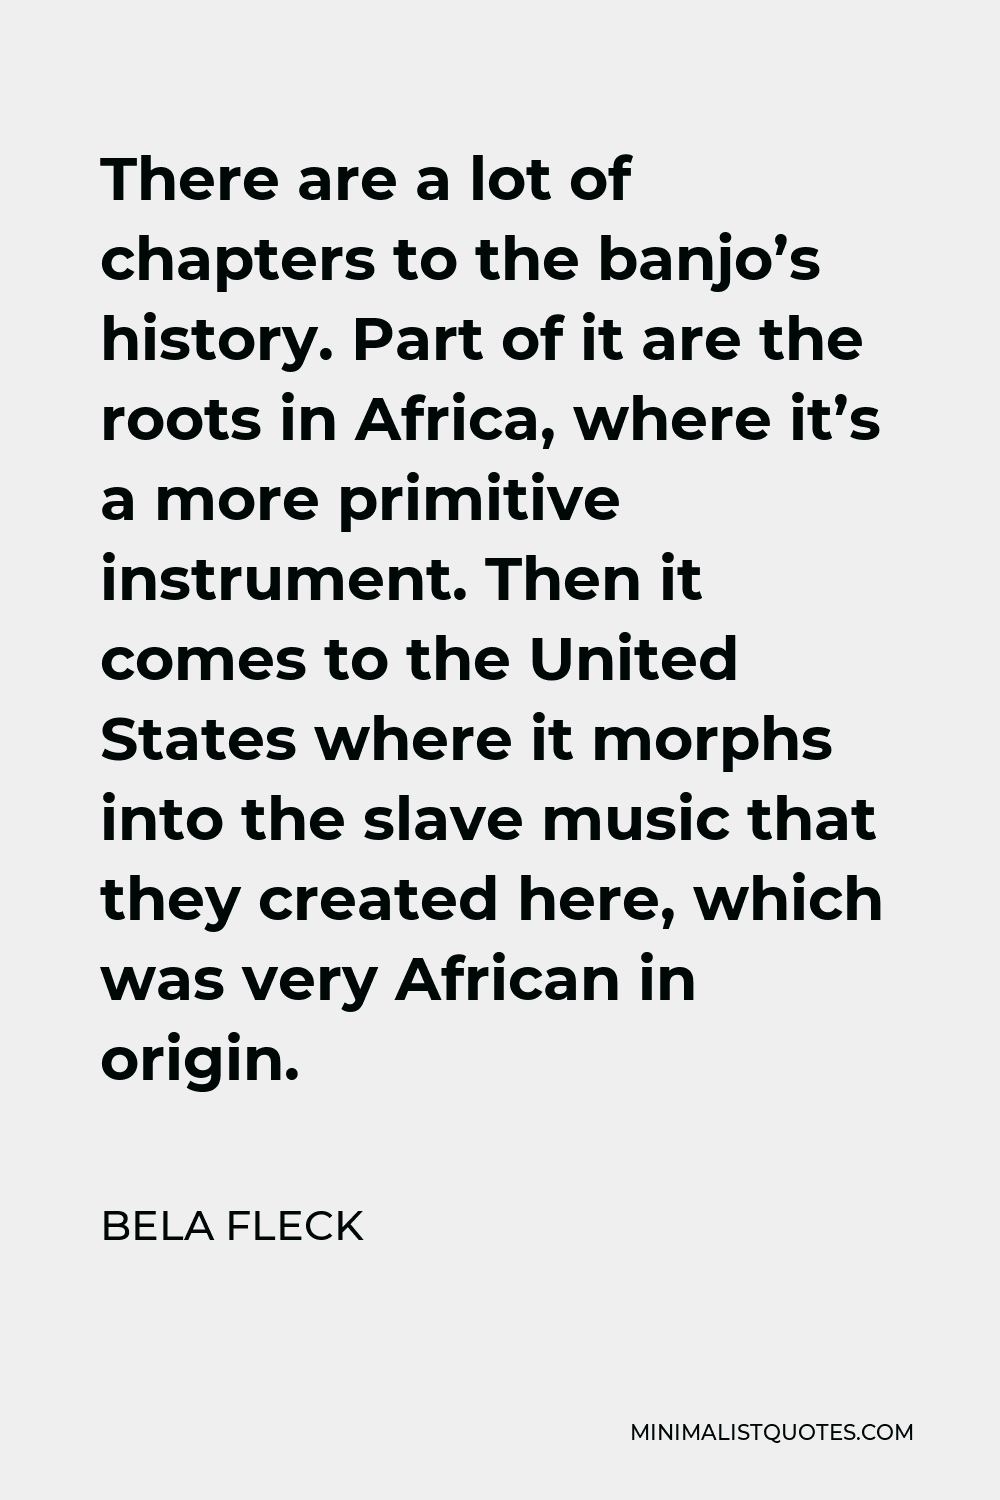 Bela Fleck Quote - There are a lot of chapters to the banjo’s history. Part of it are the roots in Africa, where it’s a more primitive instrument. Then it comes to the United States where it morphs into the slave music that they created here, which was very African in origin.